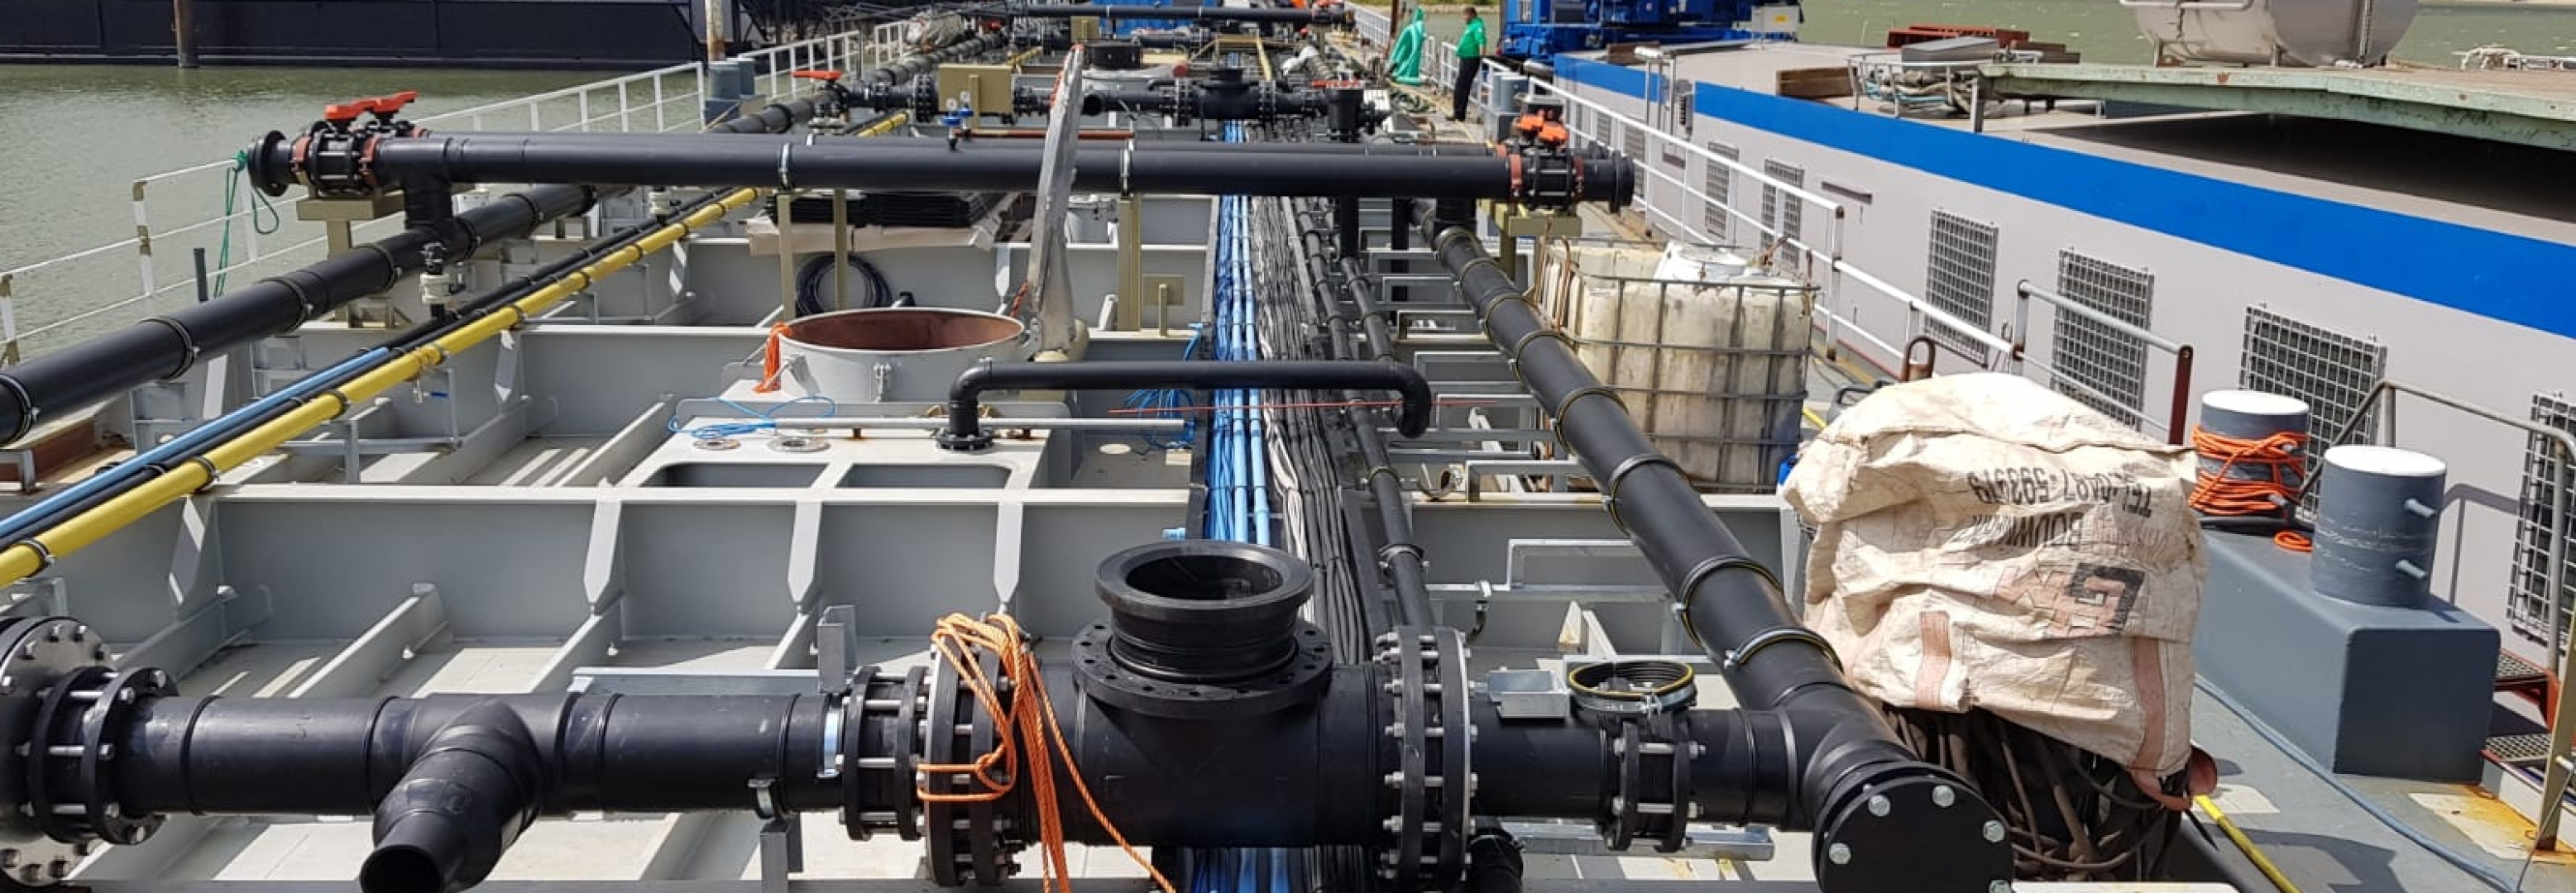 Plastic piping for a chemical tanker